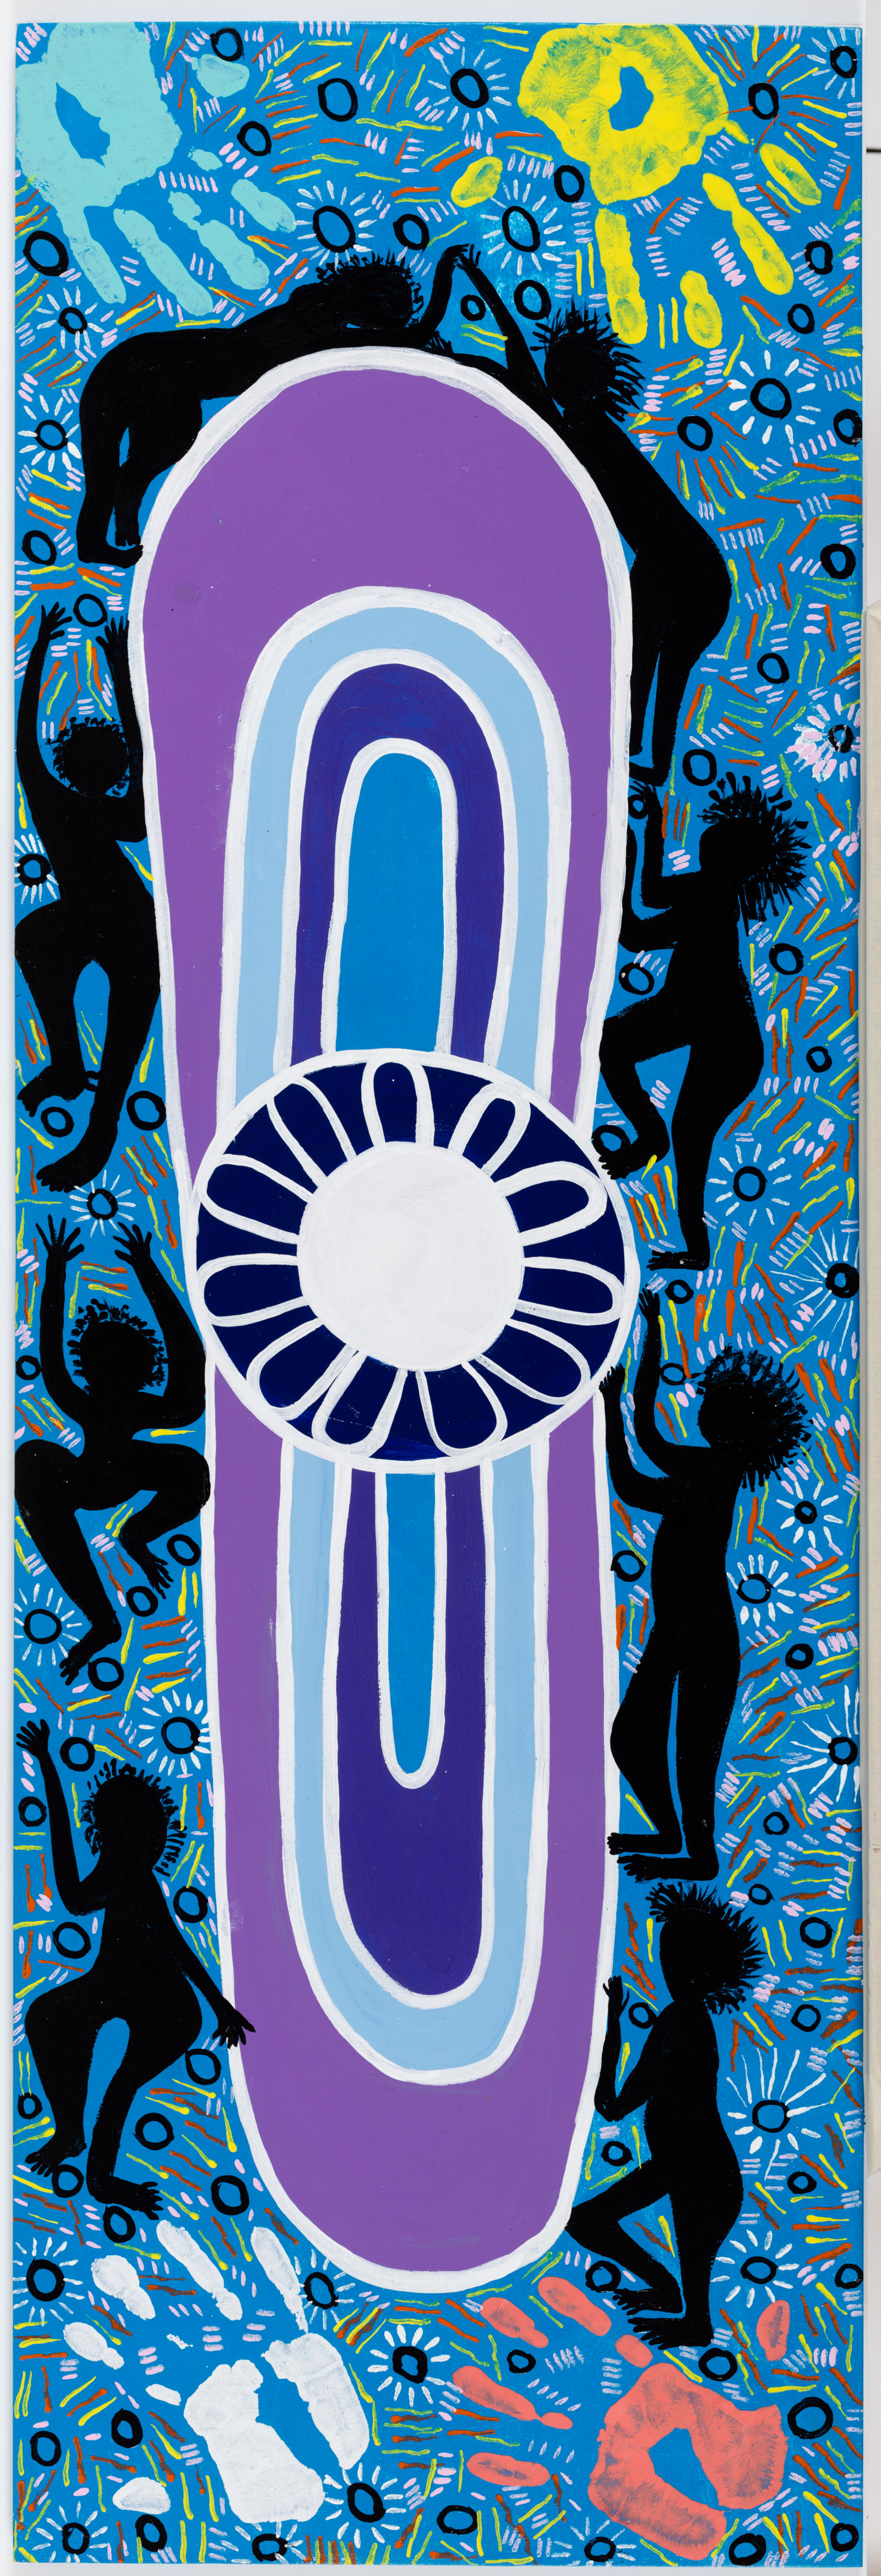 Community, Lorraine Brown and Narelle Thomas, 2022, acrylic on plywood board, 122.5cm x 41cm
Design shows community. The beautiful specks of colour representing Life and the People of Coomie Community.